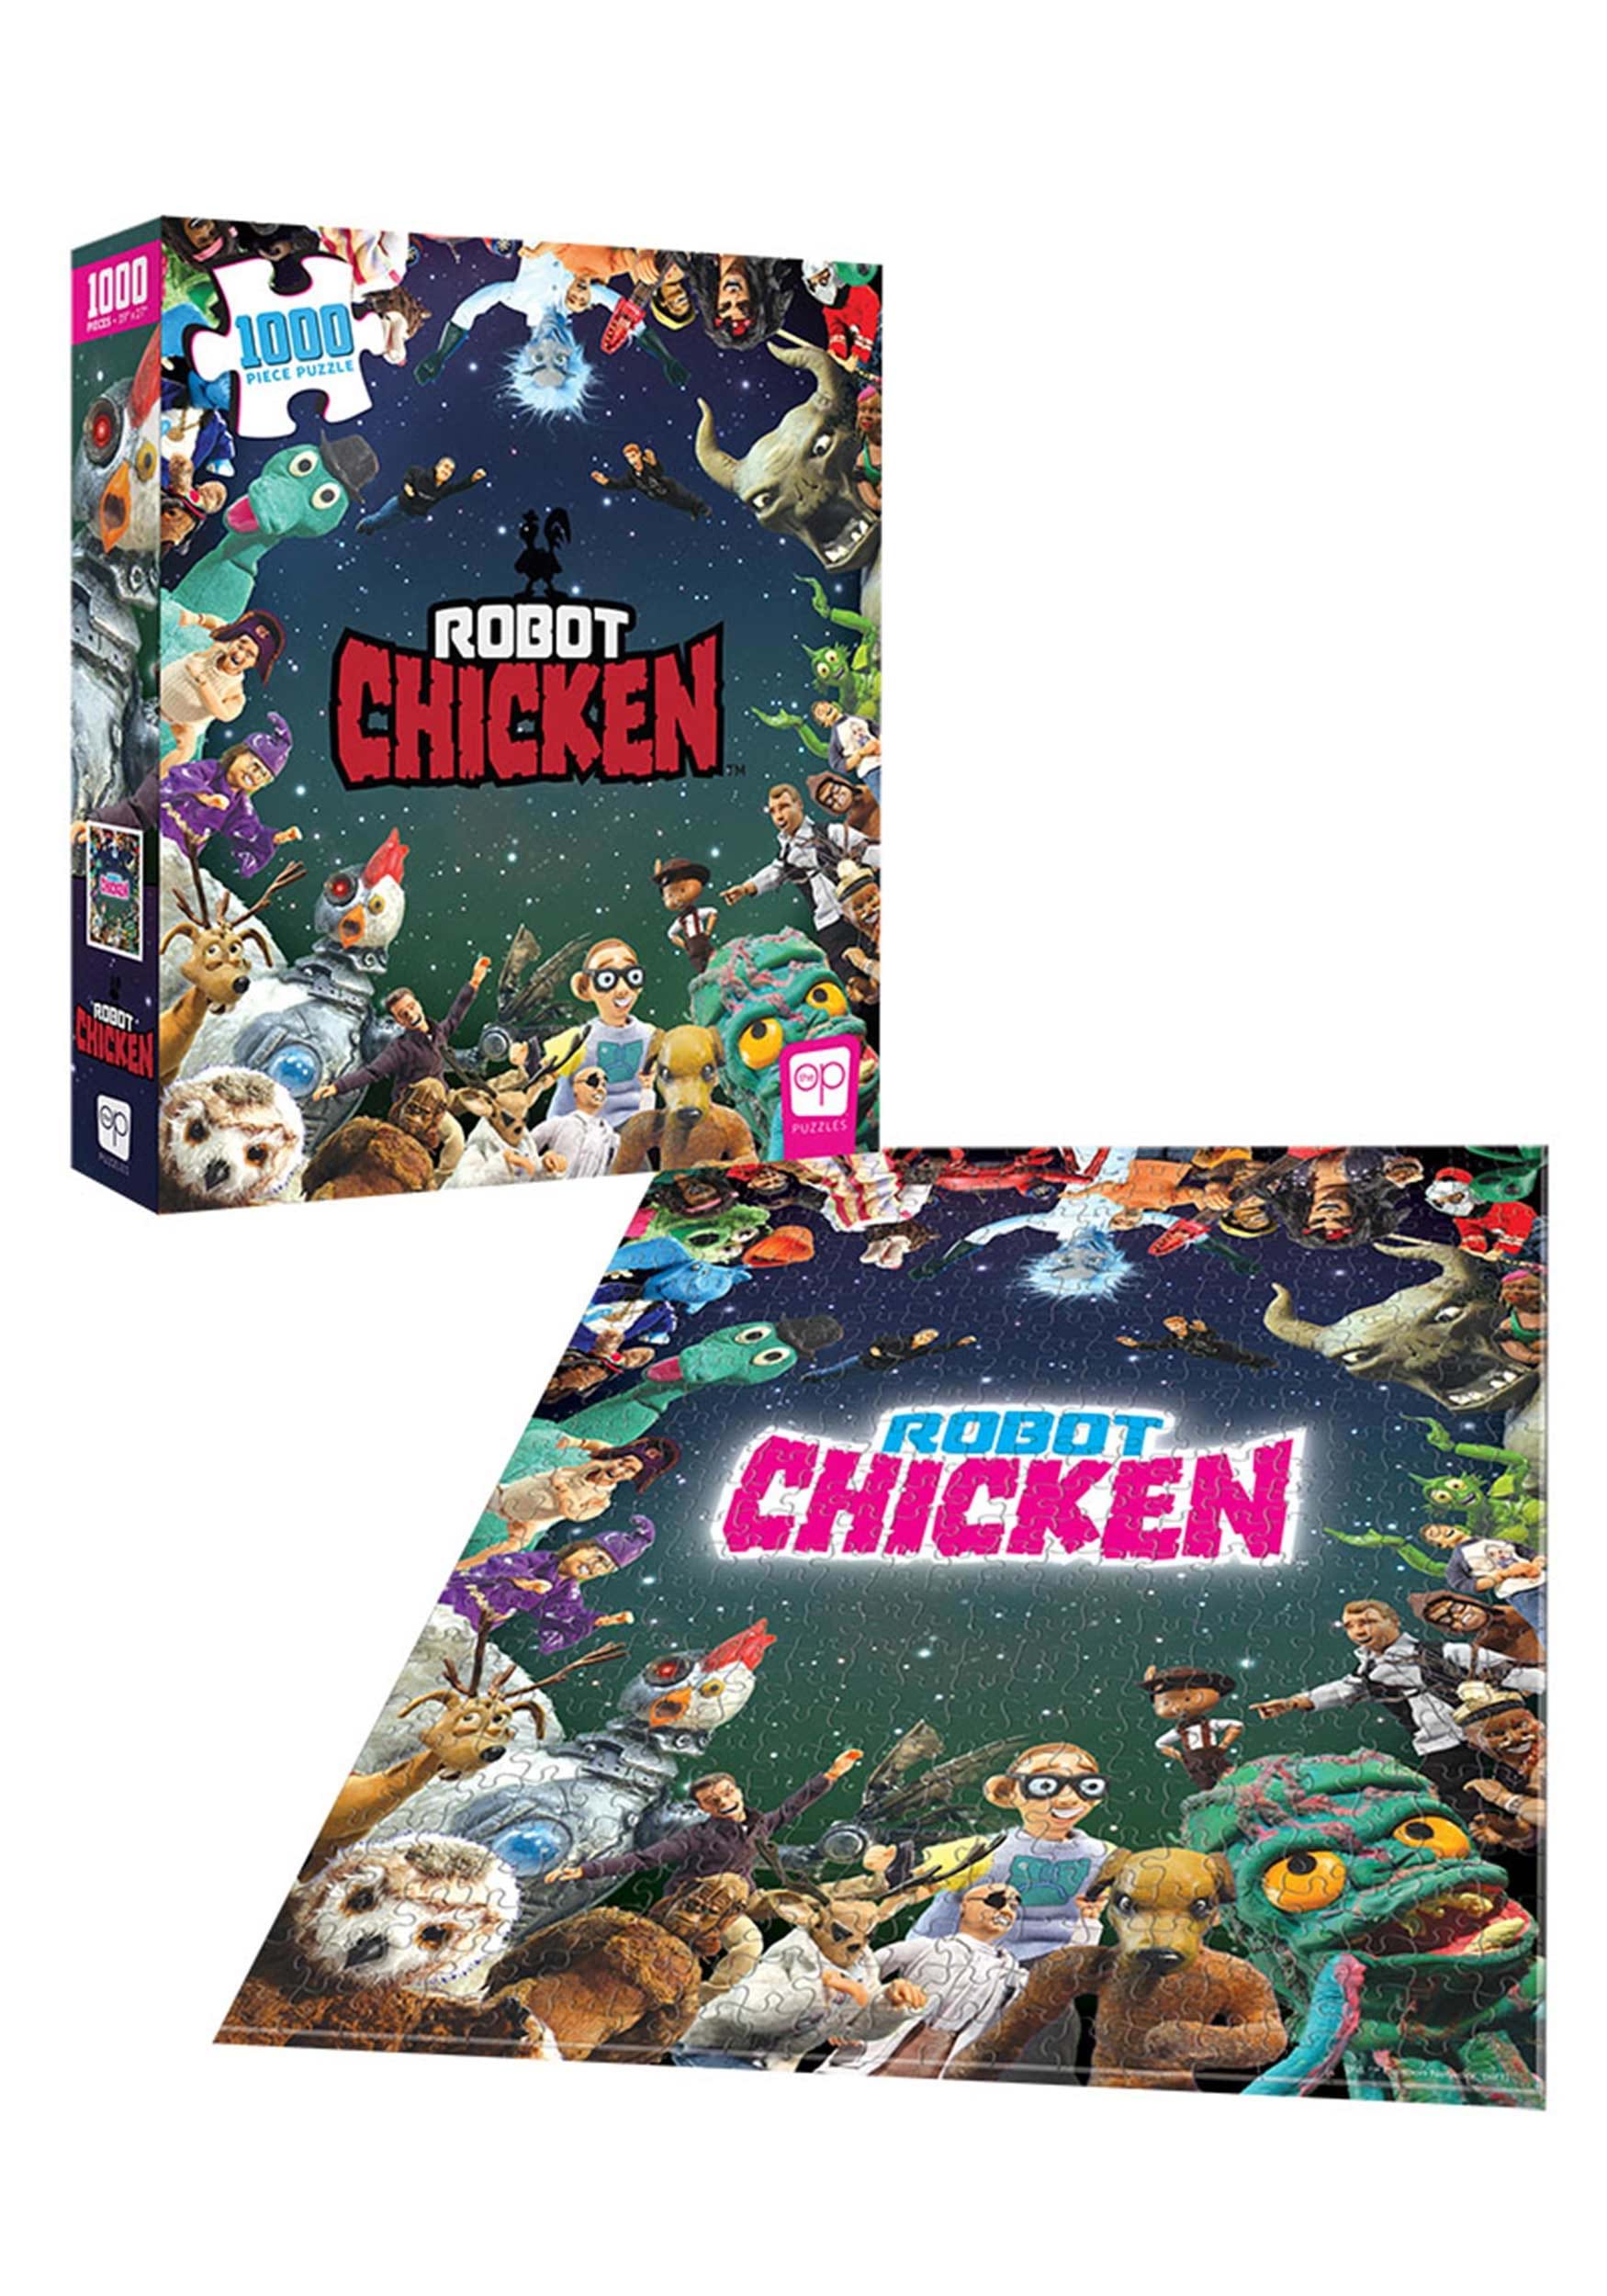 1000 Piece Robot Chicken Puzzle | TV and Movie Puzzles